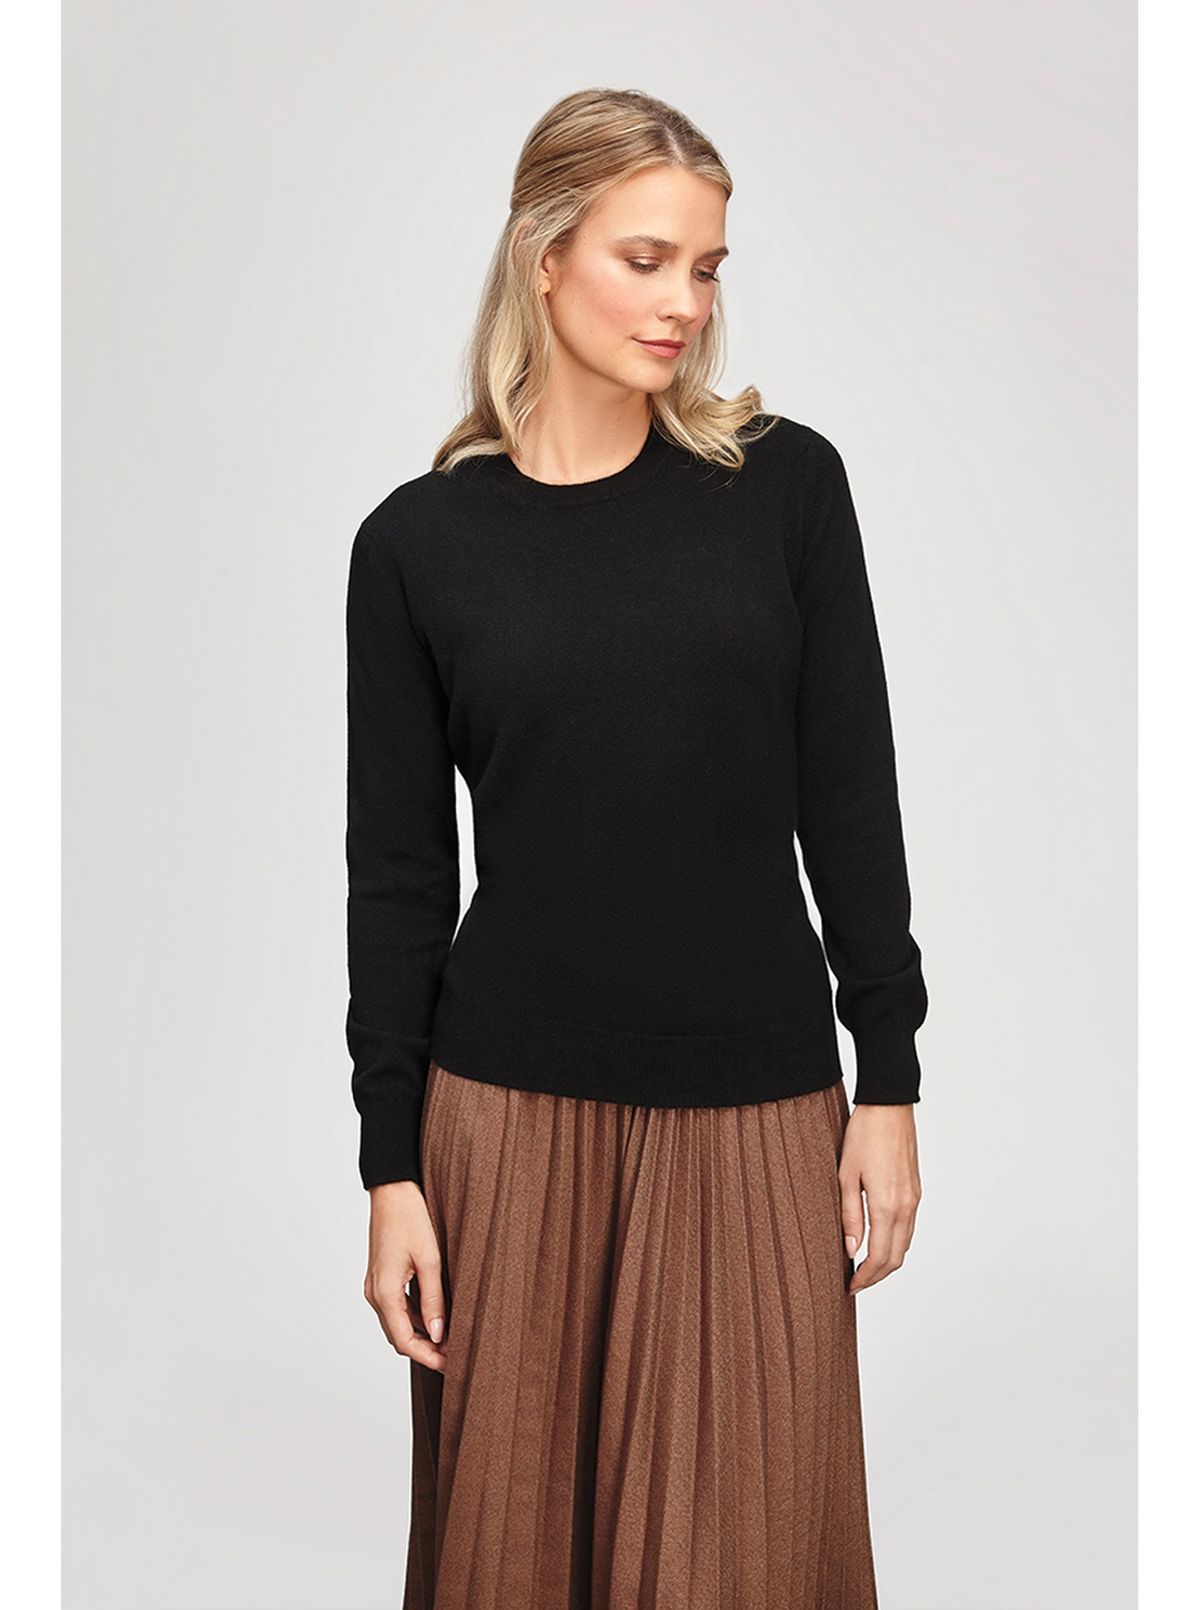 Womens Cashmere Pullovers - Maus & Hoffman